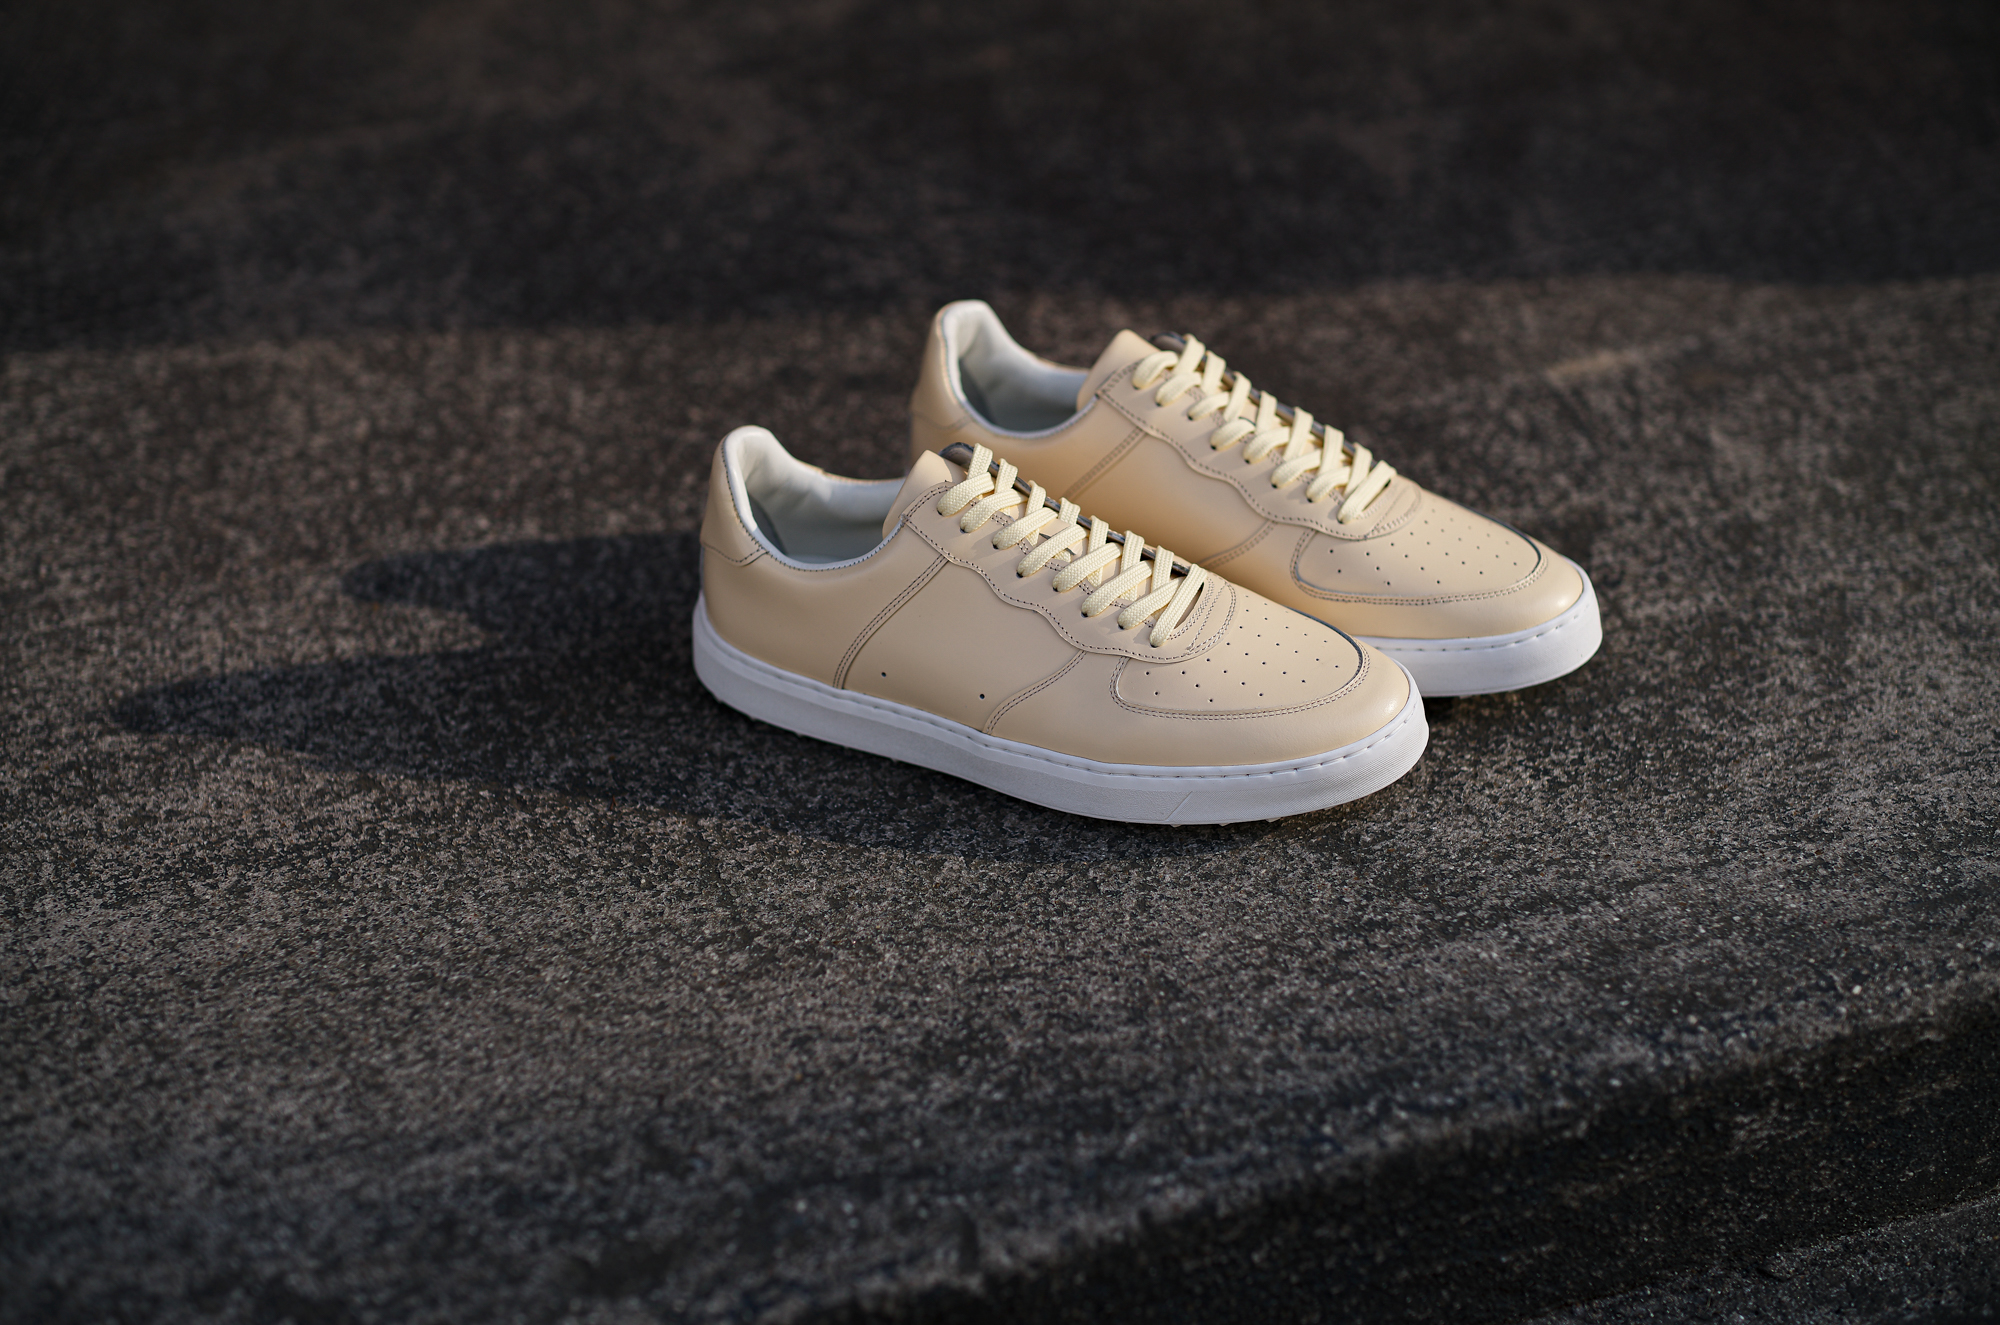 WH WHA-1900 New Vodka Leather SNEAKERS LIGHT BEIGE 2024SS【Size 7】ダブルエイチ NEW ウォッカ レザー スニーカー ライトベージュ 2024年春夏 愛知 名古屋 Alto e Diritto altoediritto アルトエデリット 白ソール